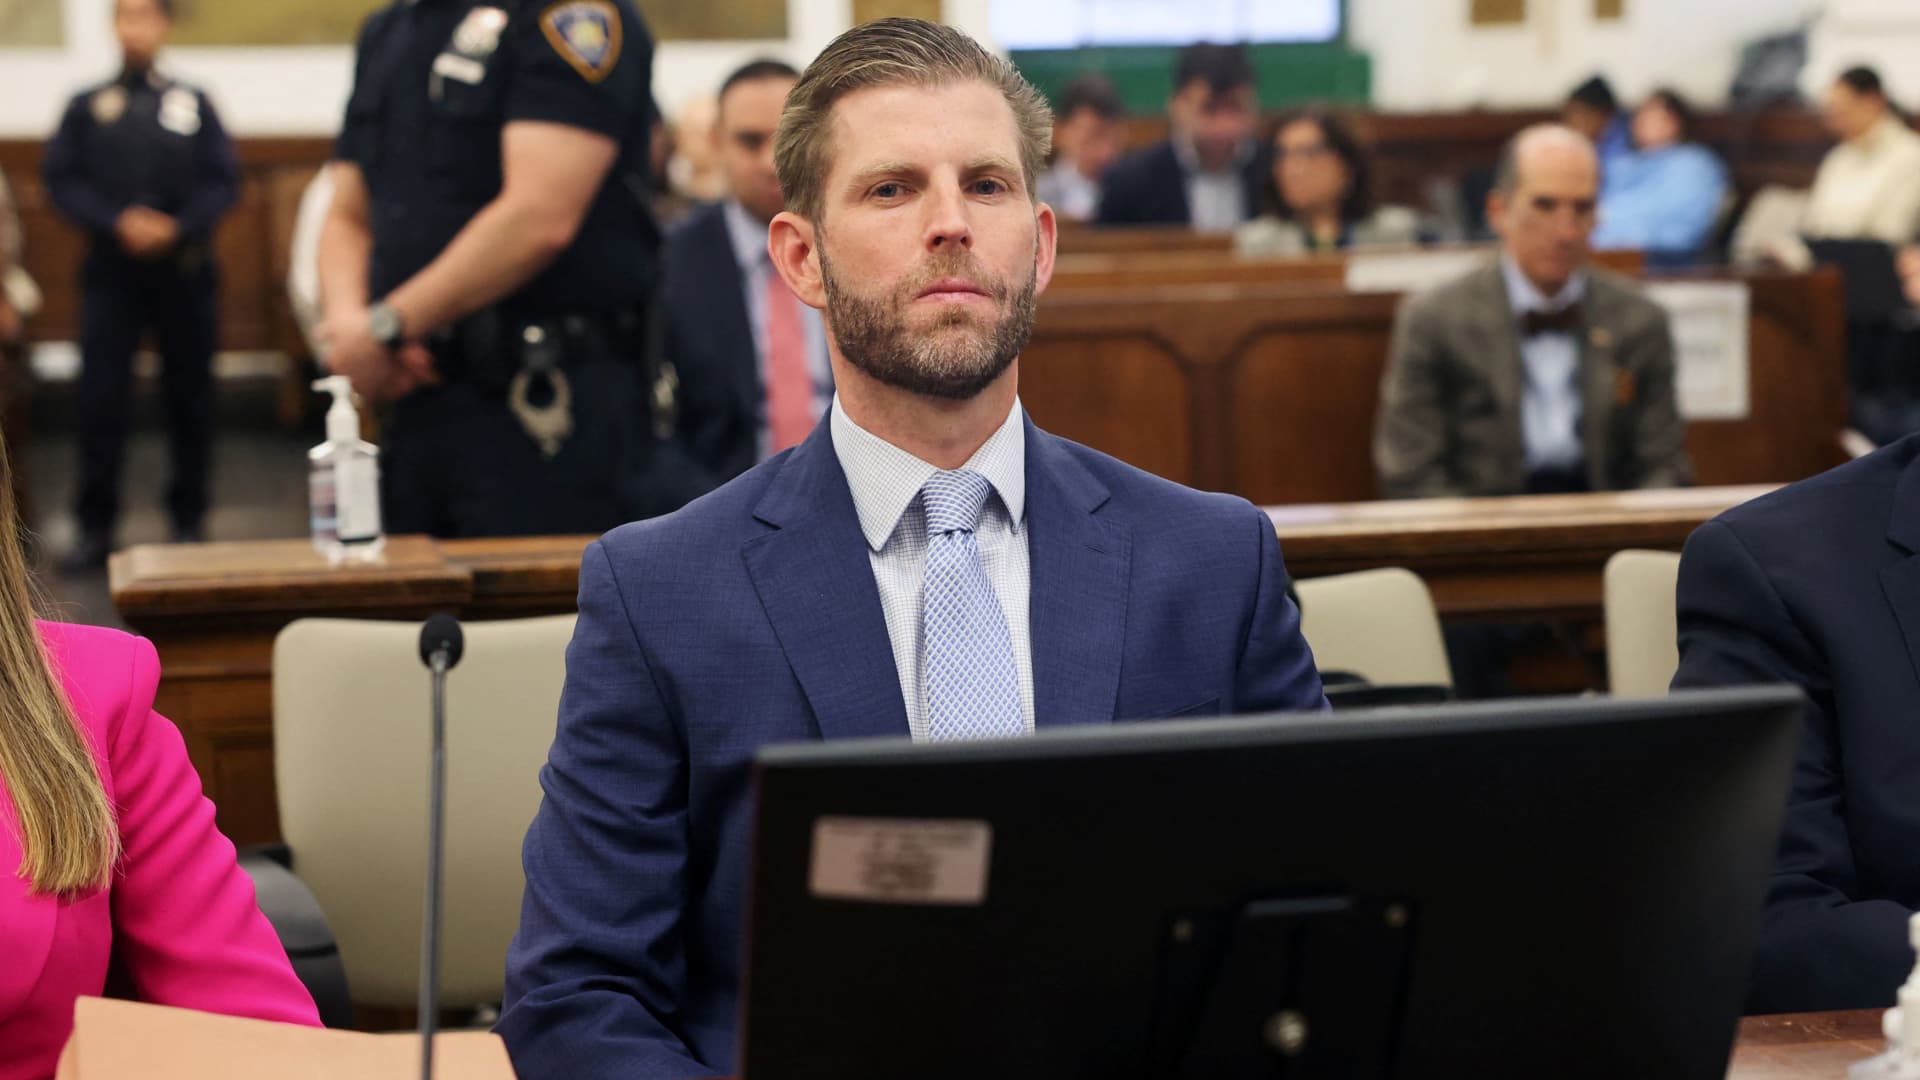 Former U.S. President Donald Trump's son and co-defendant Eric Trump attends the Trump Organization civil fraud trial, in New York State Supreme Court in the Manhattan borough of New York City on Nov. 3, 2023.